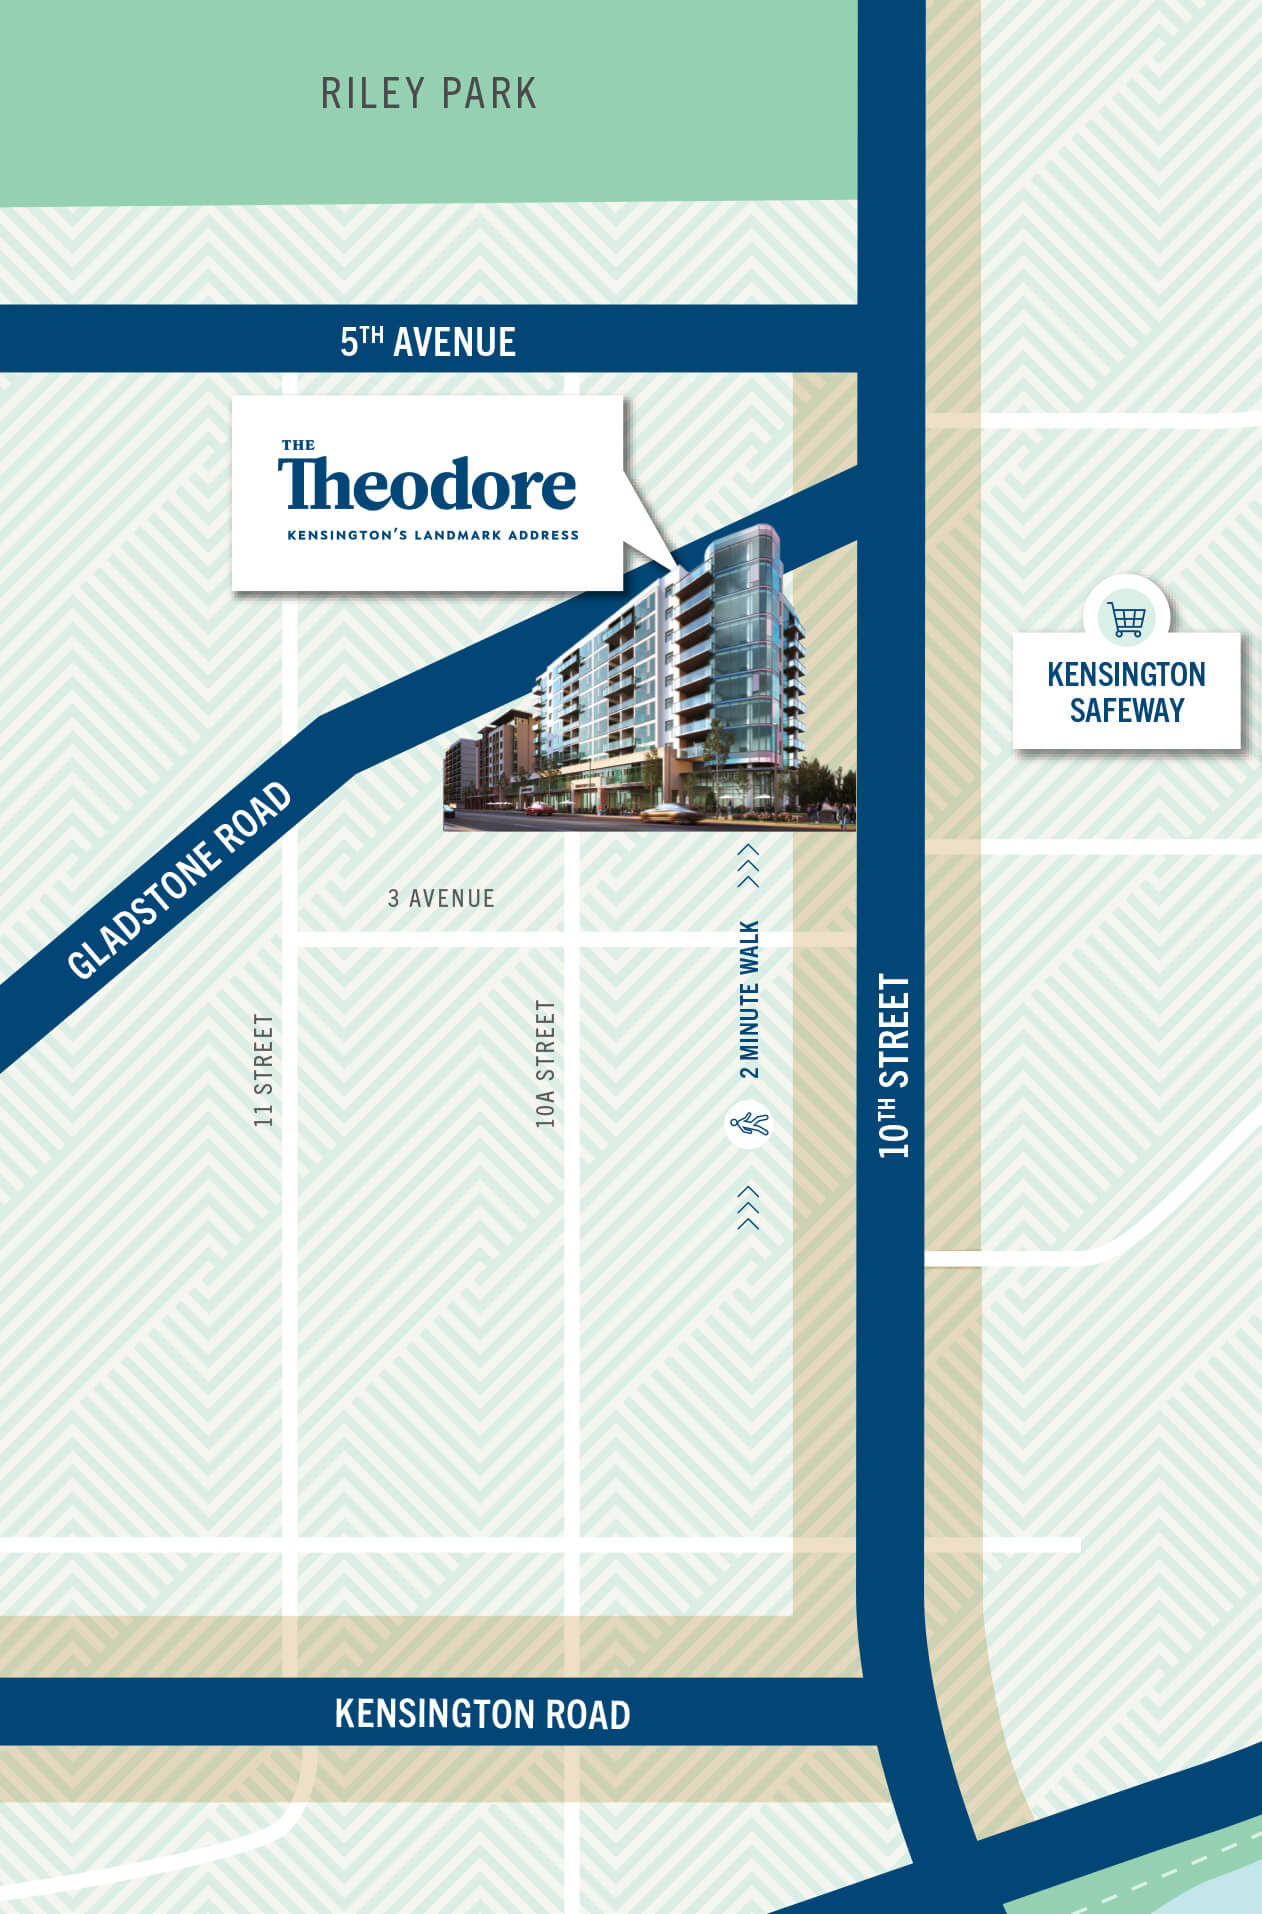 Location map of The Theodore and Presentation Centre & Show Suite